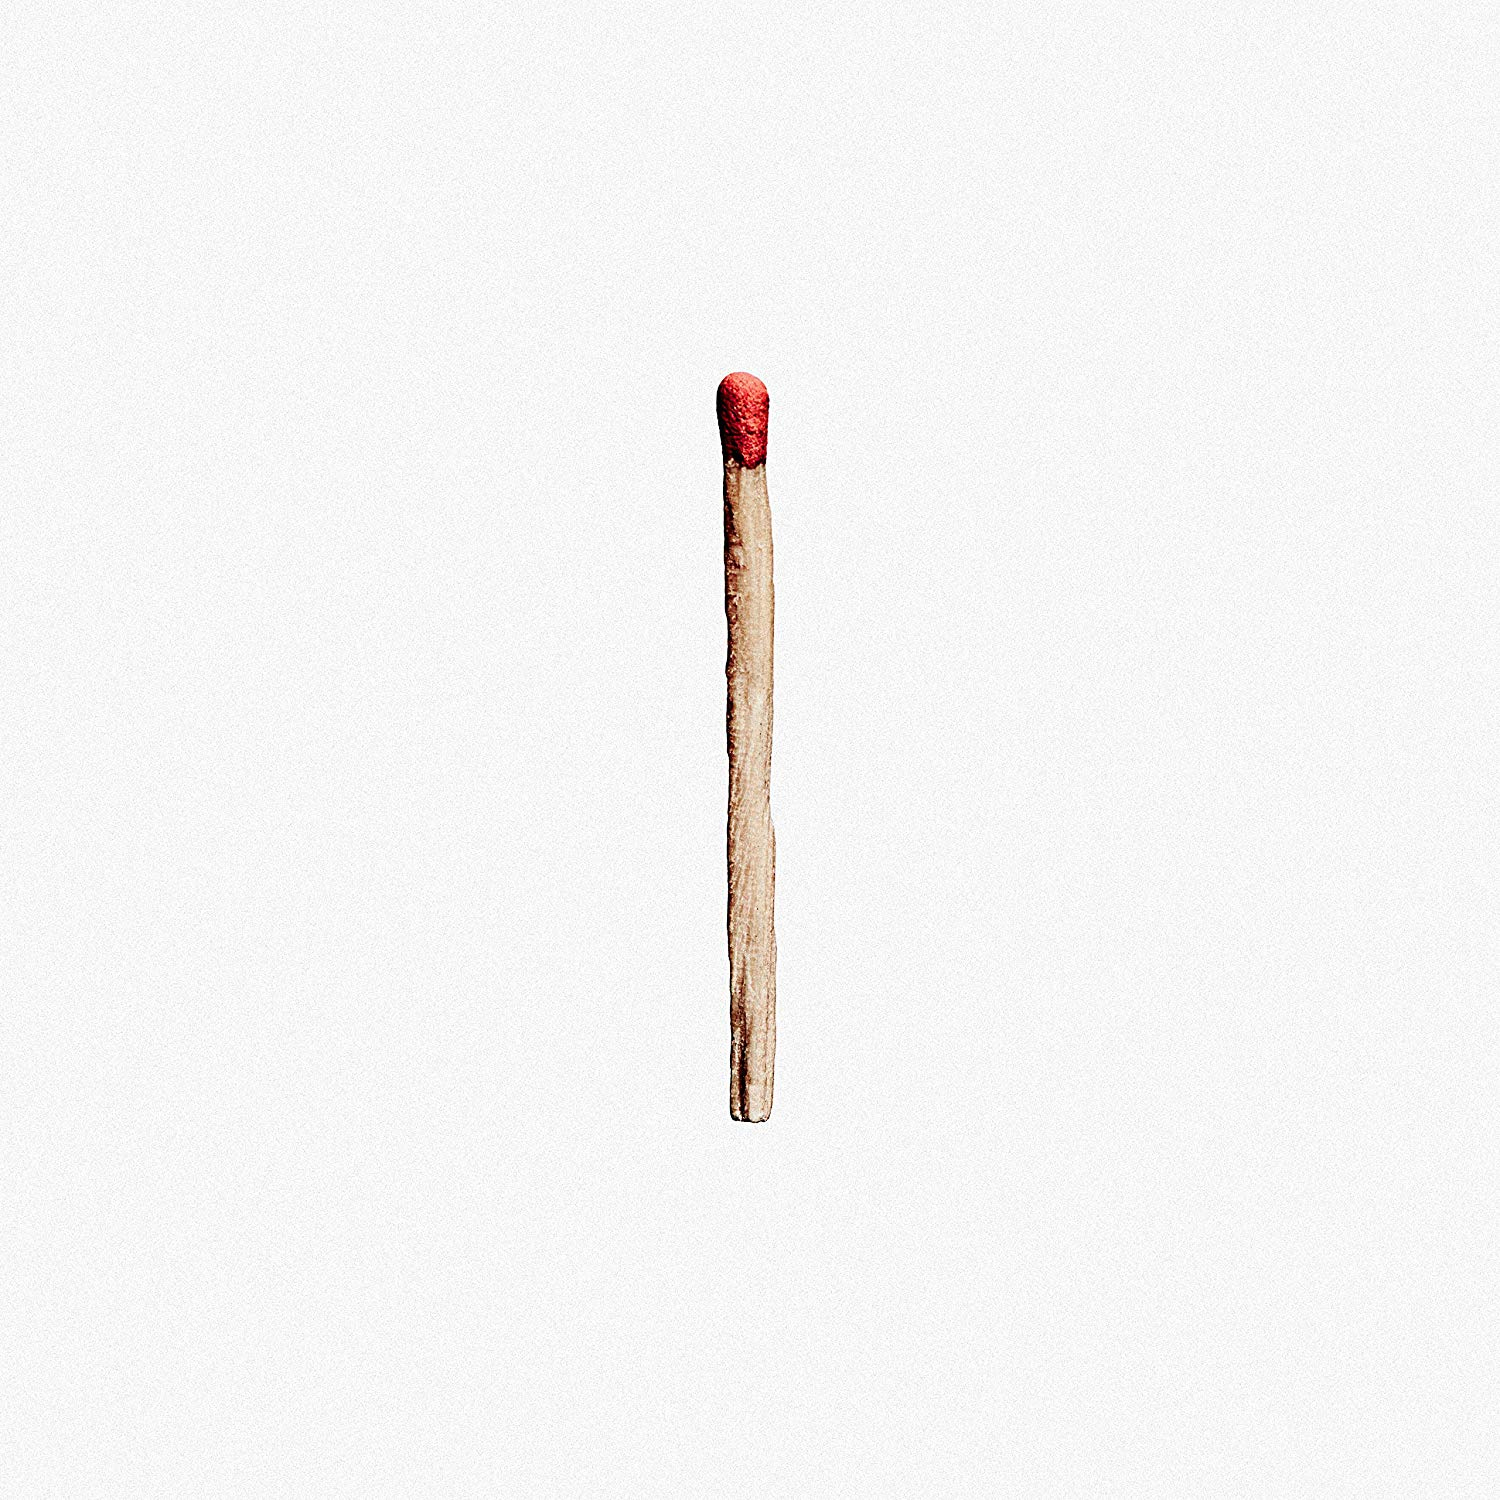 RAMMSTEIN: “RADIO” SINGLE & VIDEO OUT NOW